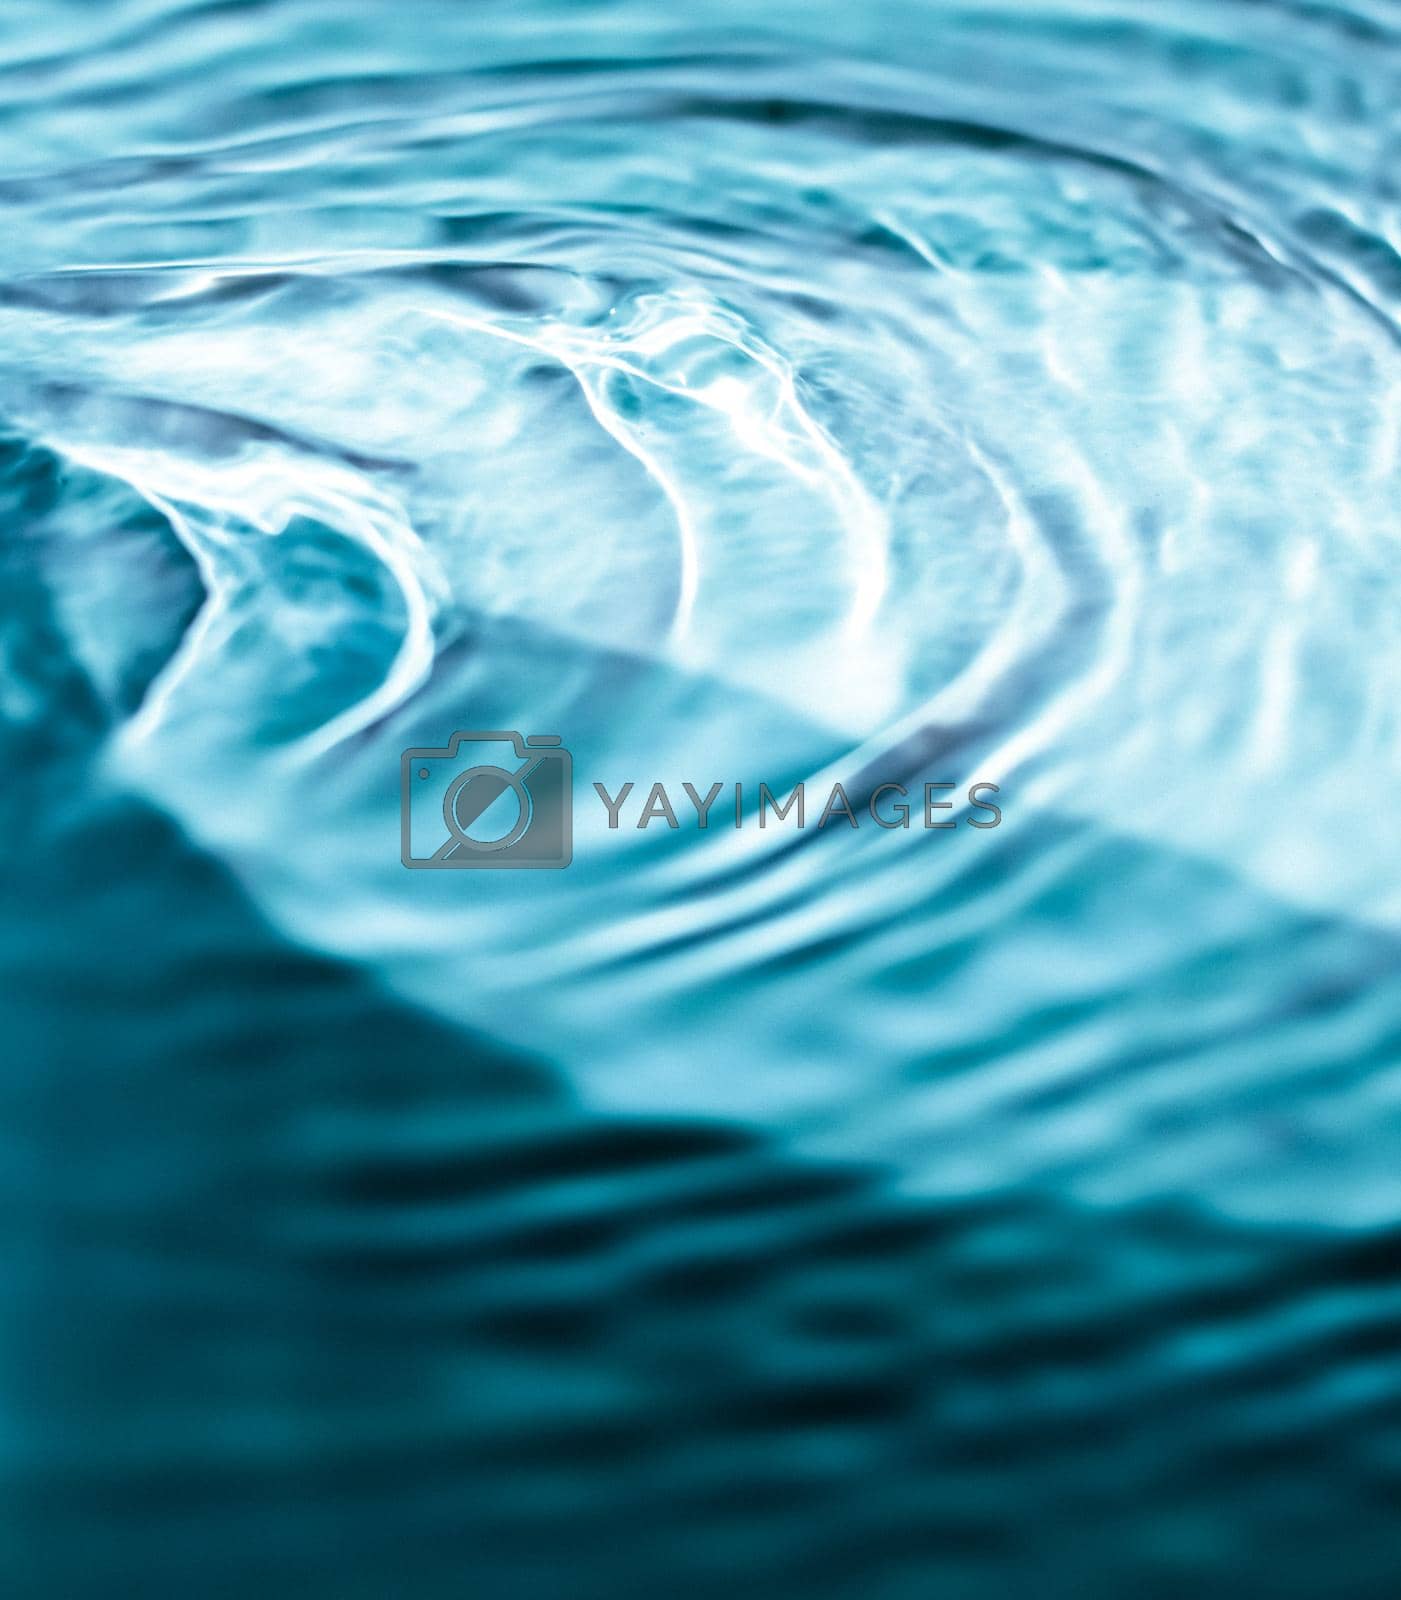 Royalty free image of blue ripples, water abstract background - textures and natural elements concept by Anneleven